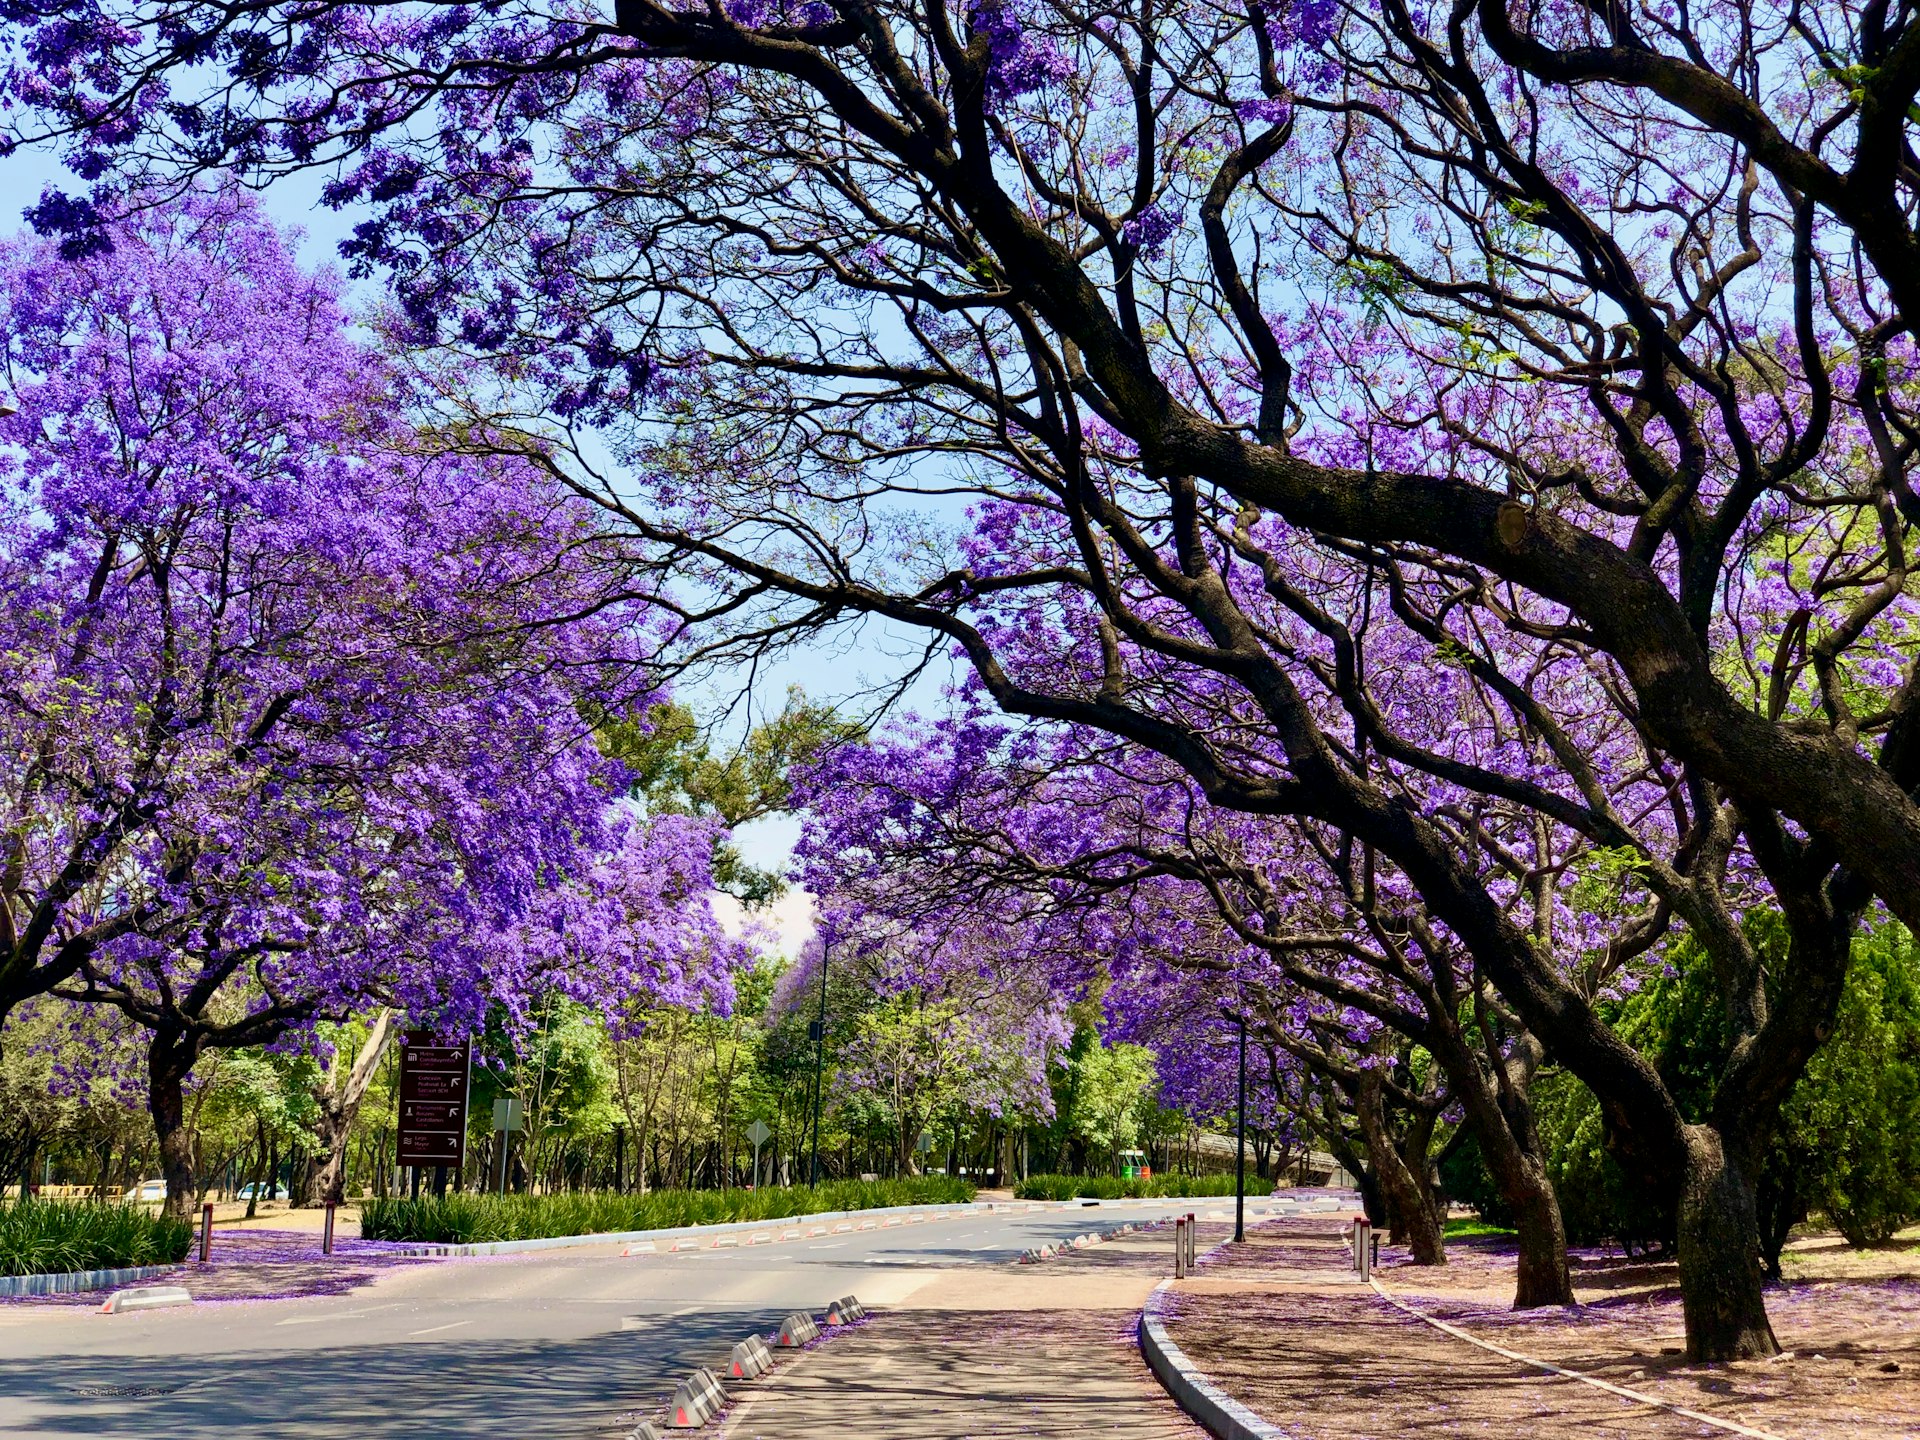 A street is lined with trees with bright purple blooms